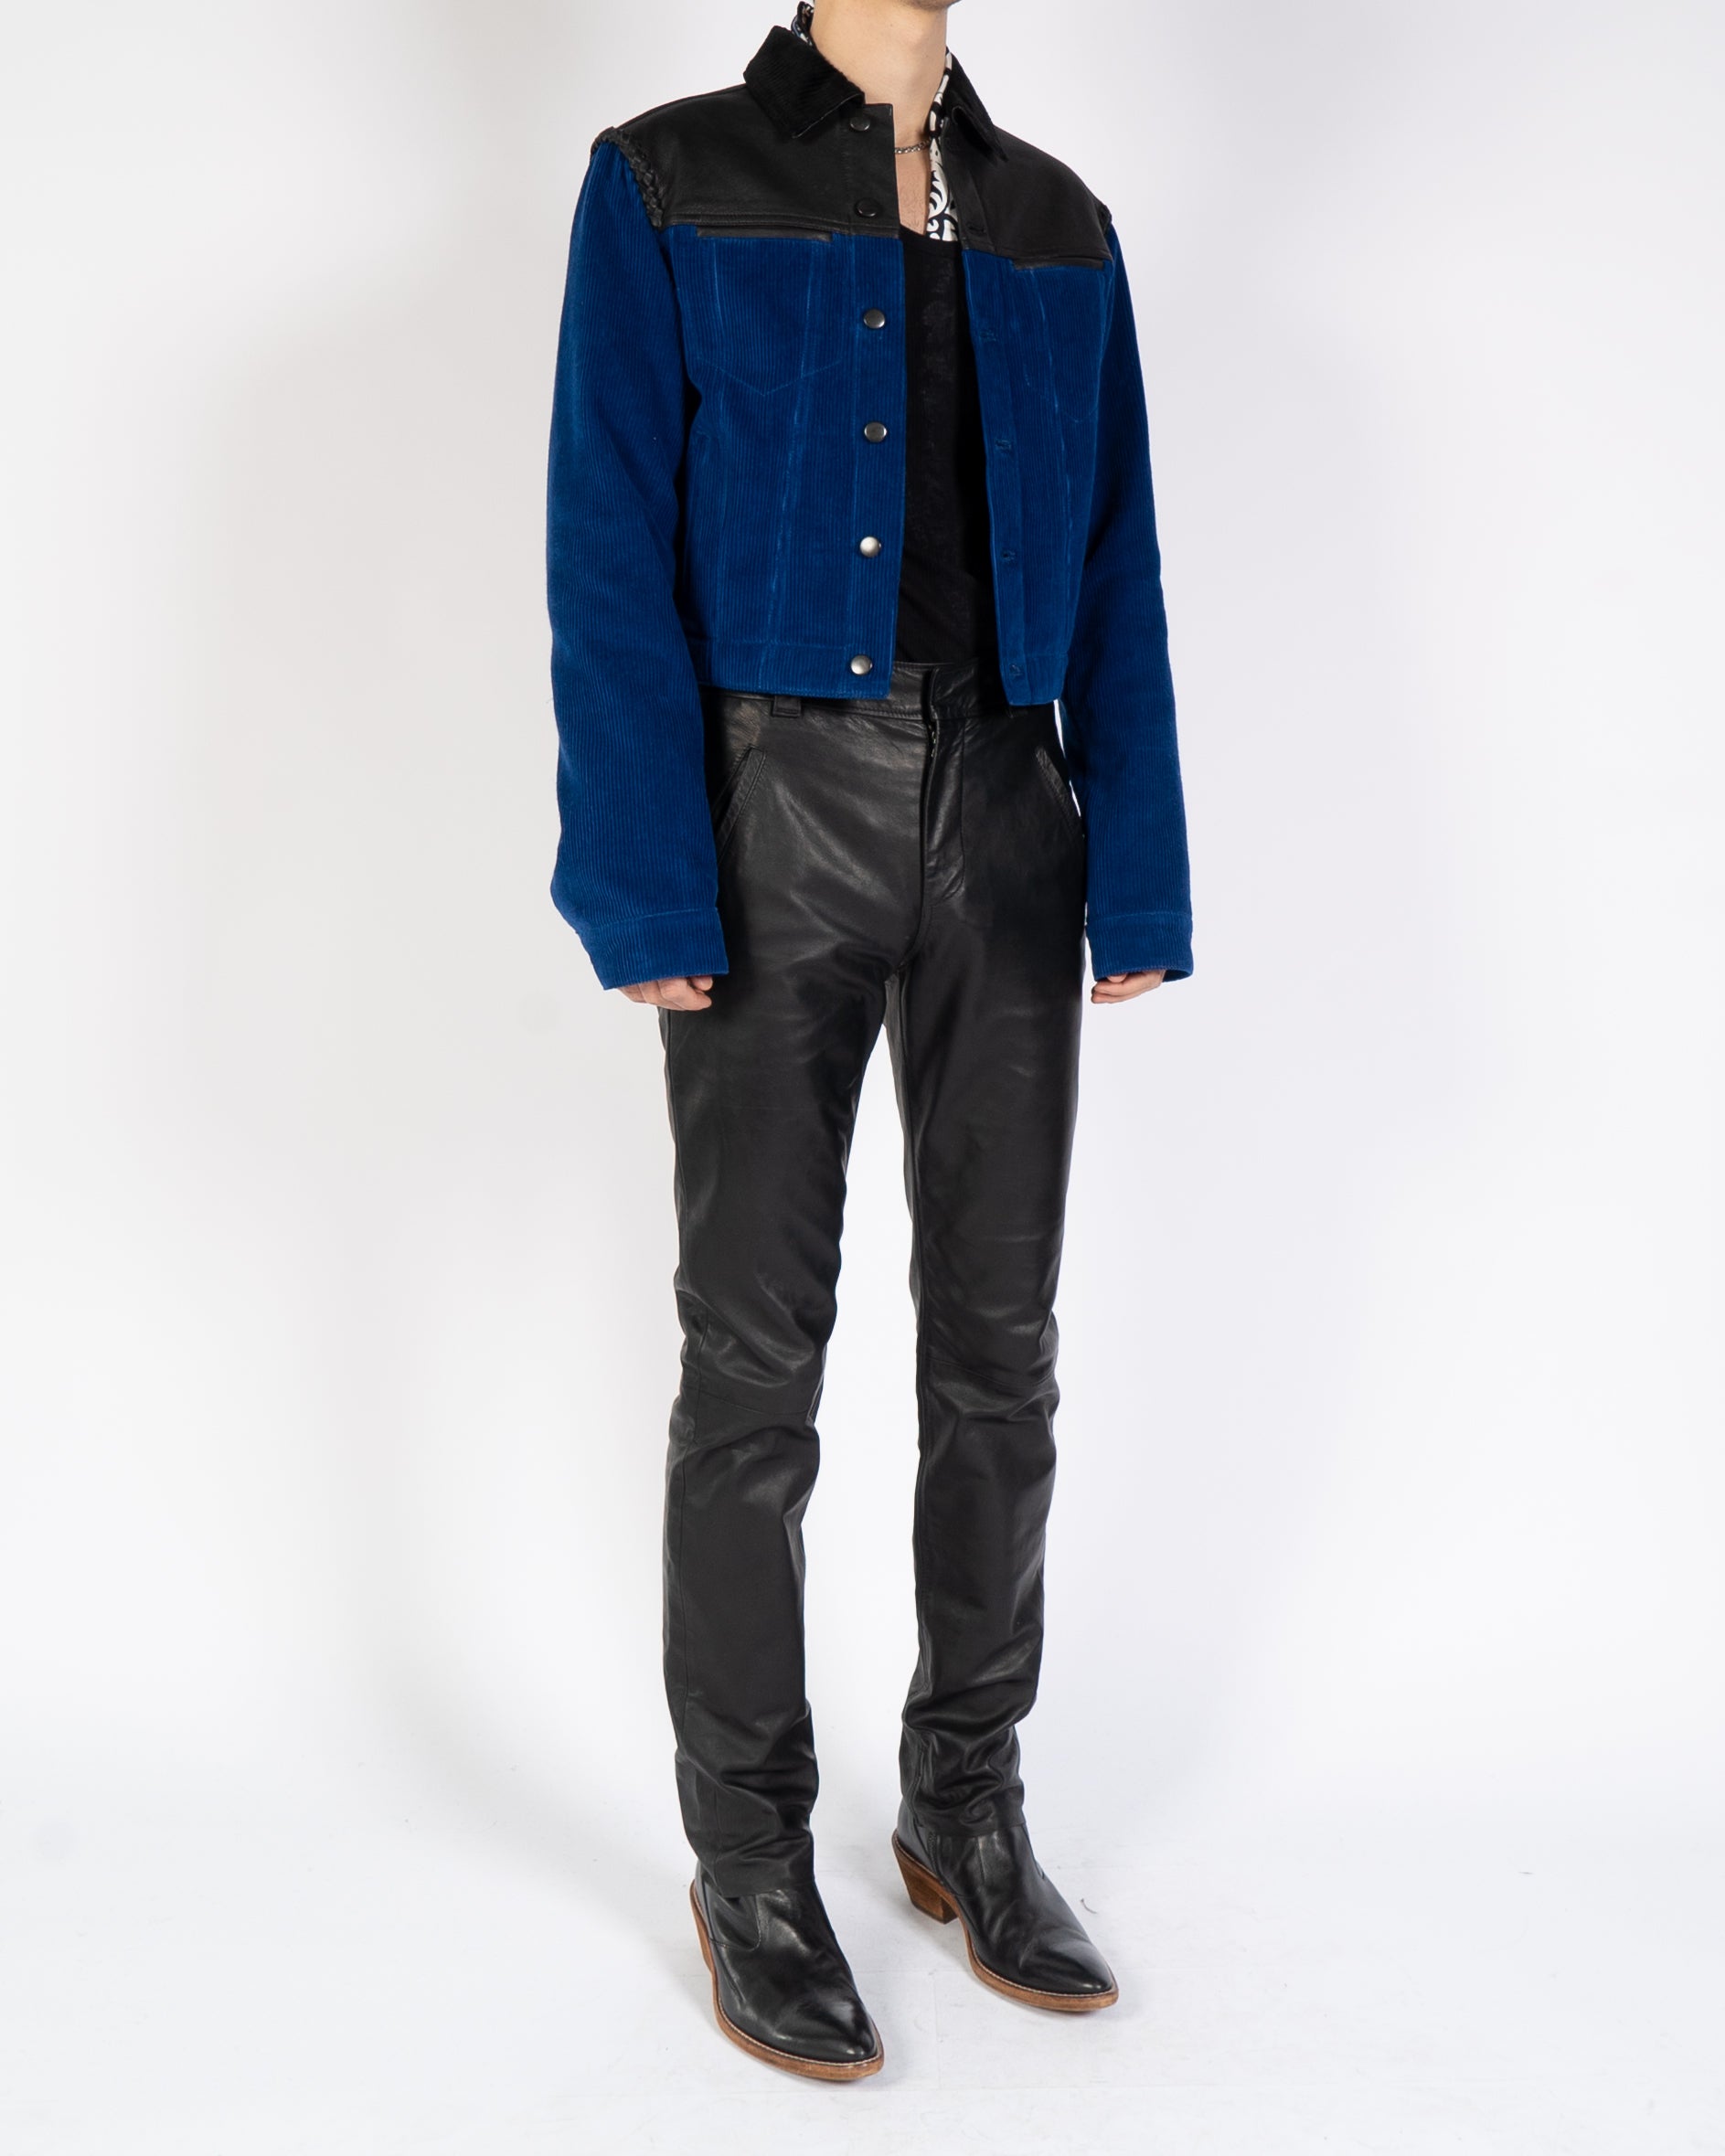 FW19 Blue Cord & Leather Jacket